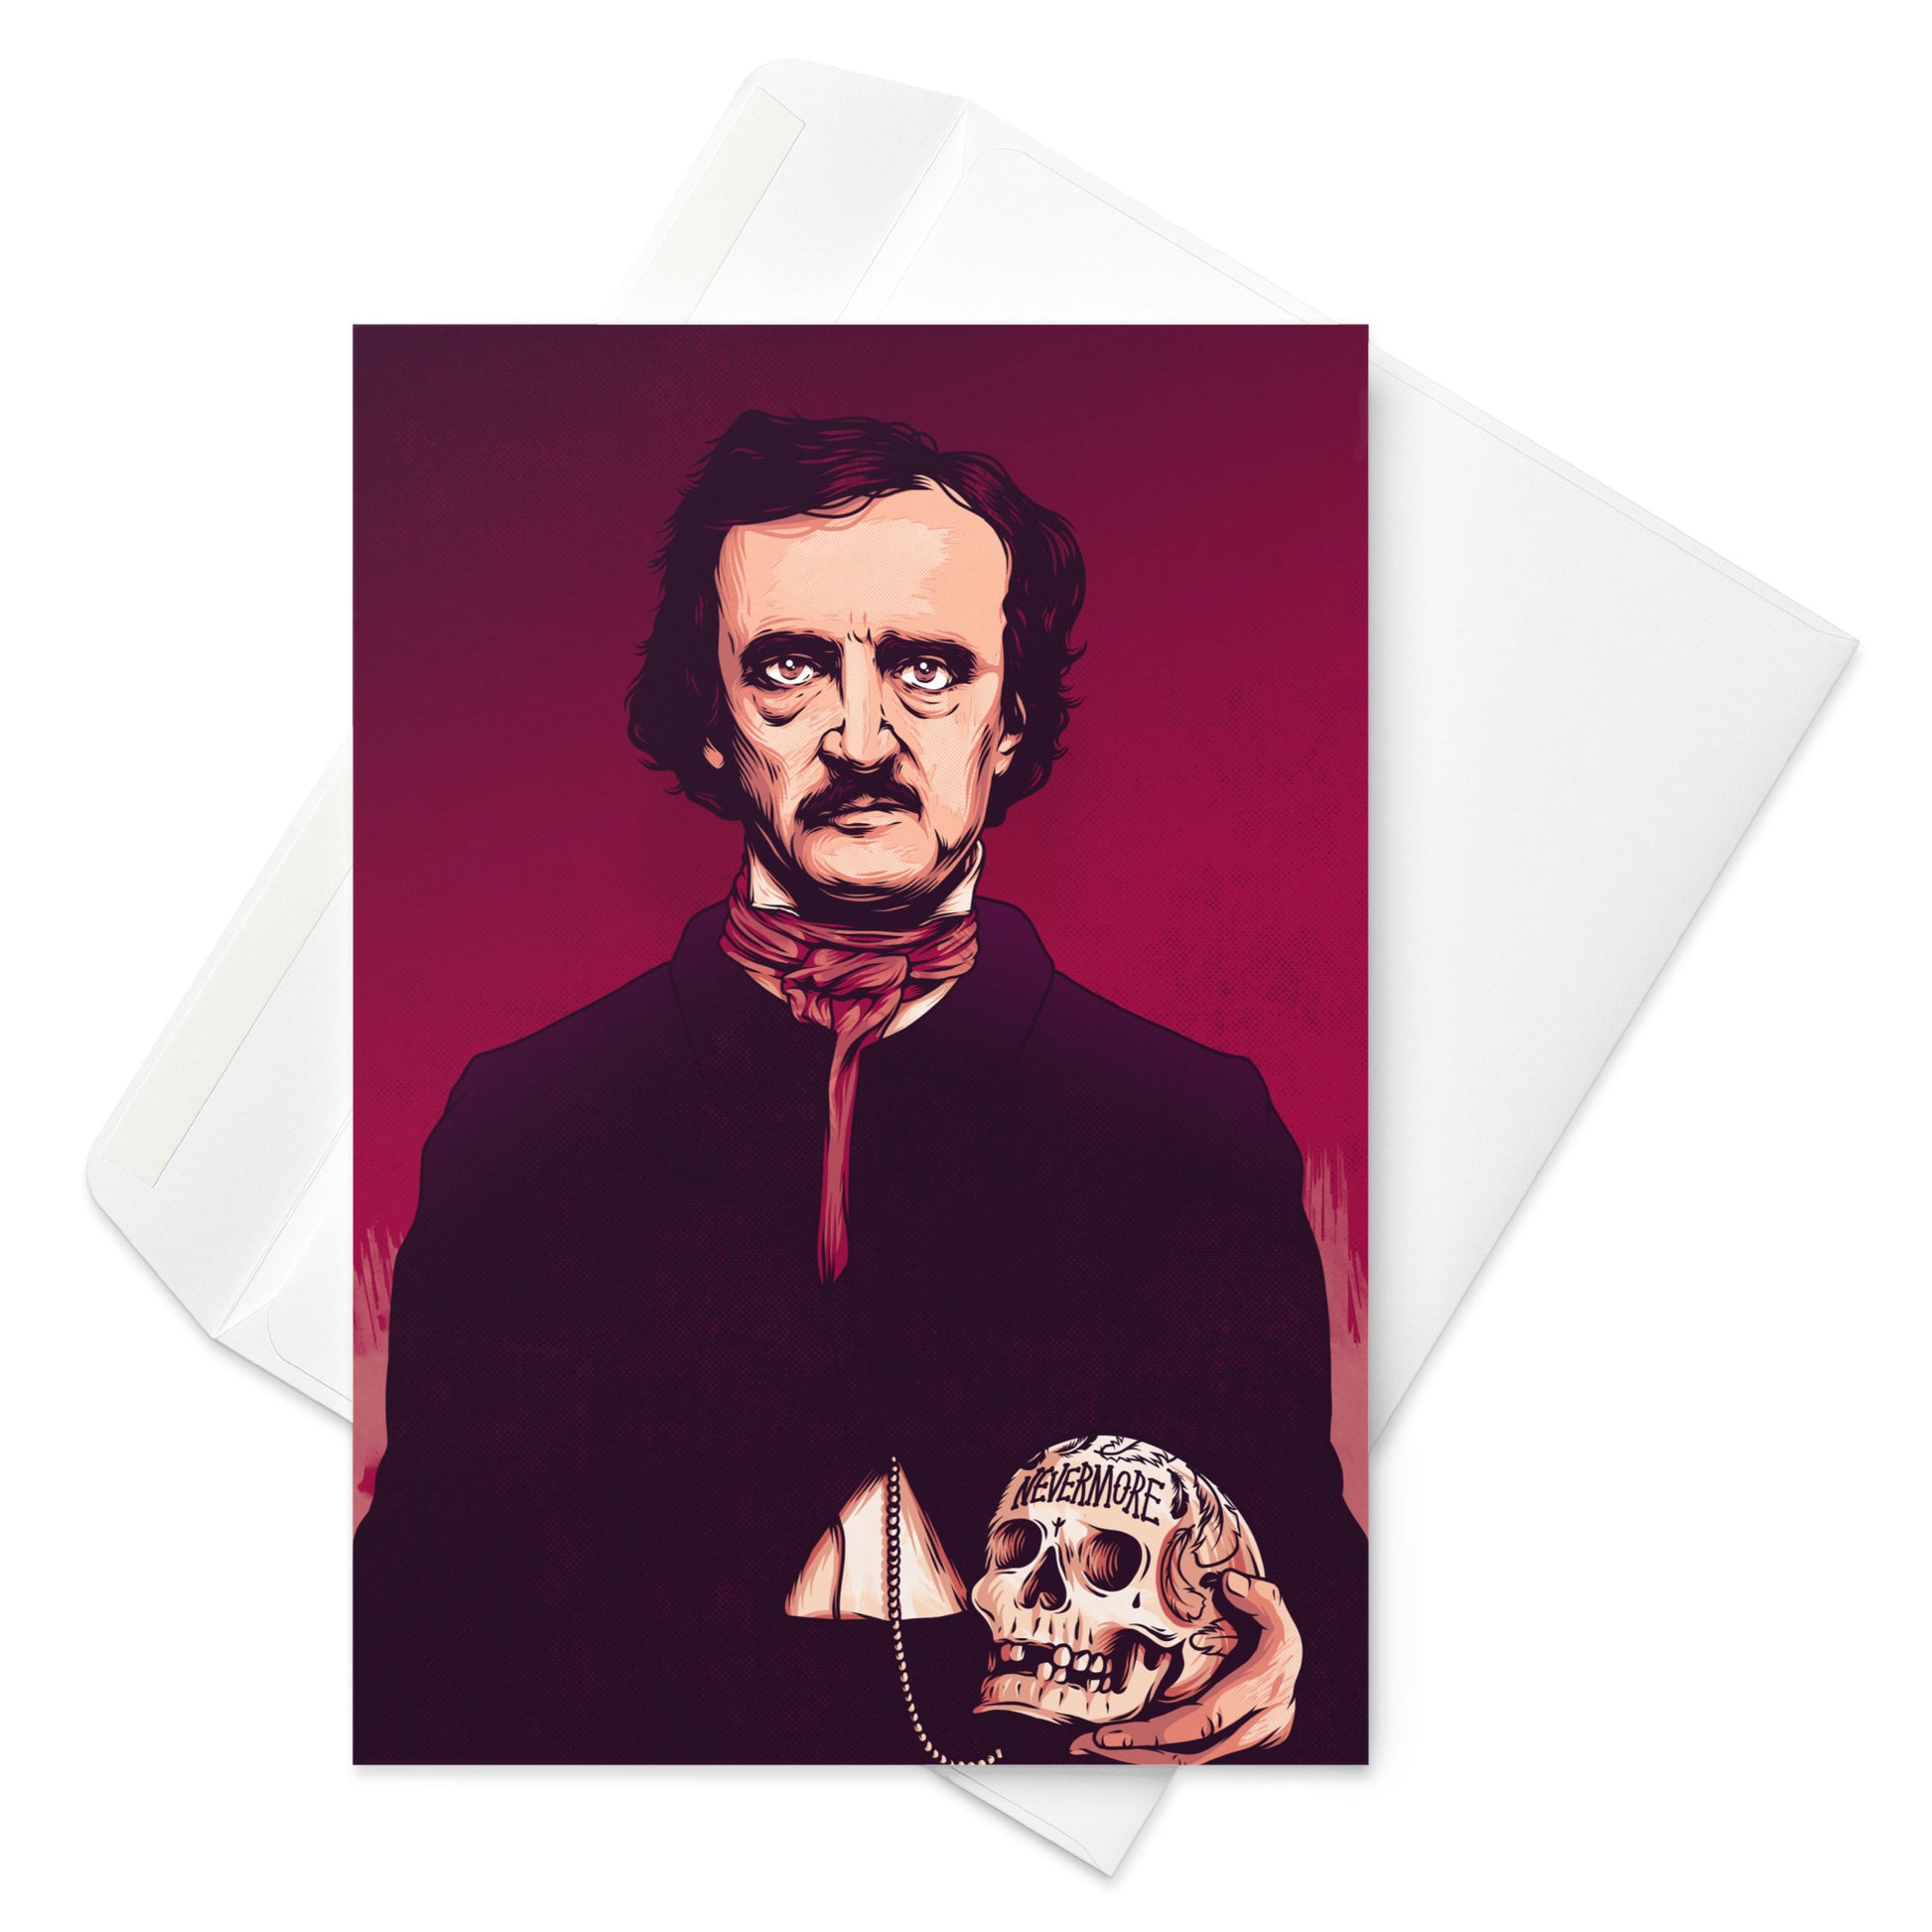 Edgar Allan Poe Illustrated Greeting Card with Raven and Skull Design - 5.83x8.27